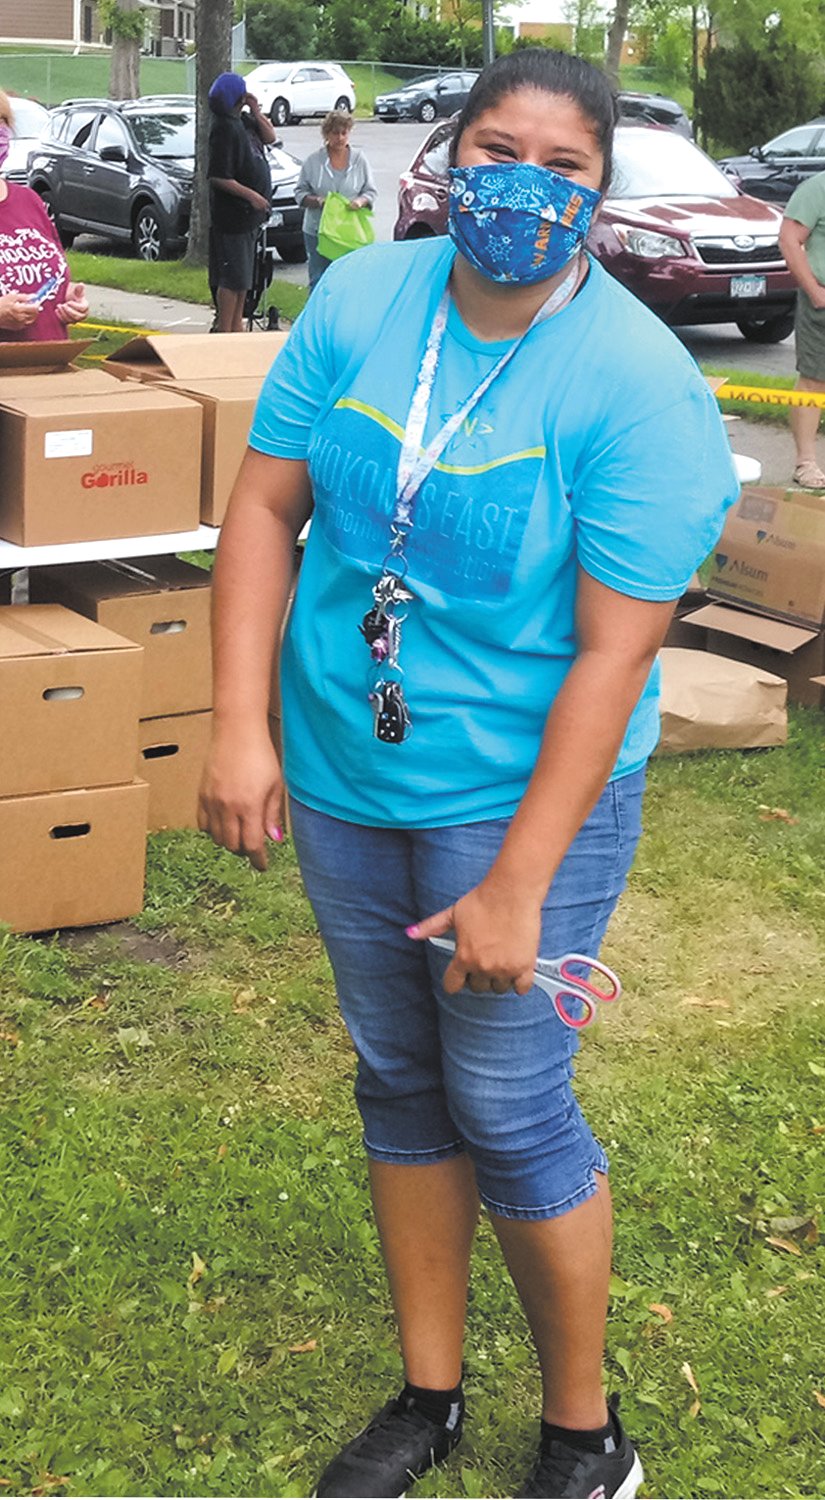 NENA Community Organizer Karla Arredondo-Payan has been focusing her attention on providing culturally appropriate food items for people to choose from at Bossen Park Apartments events. (Photo courtesy of NENA)